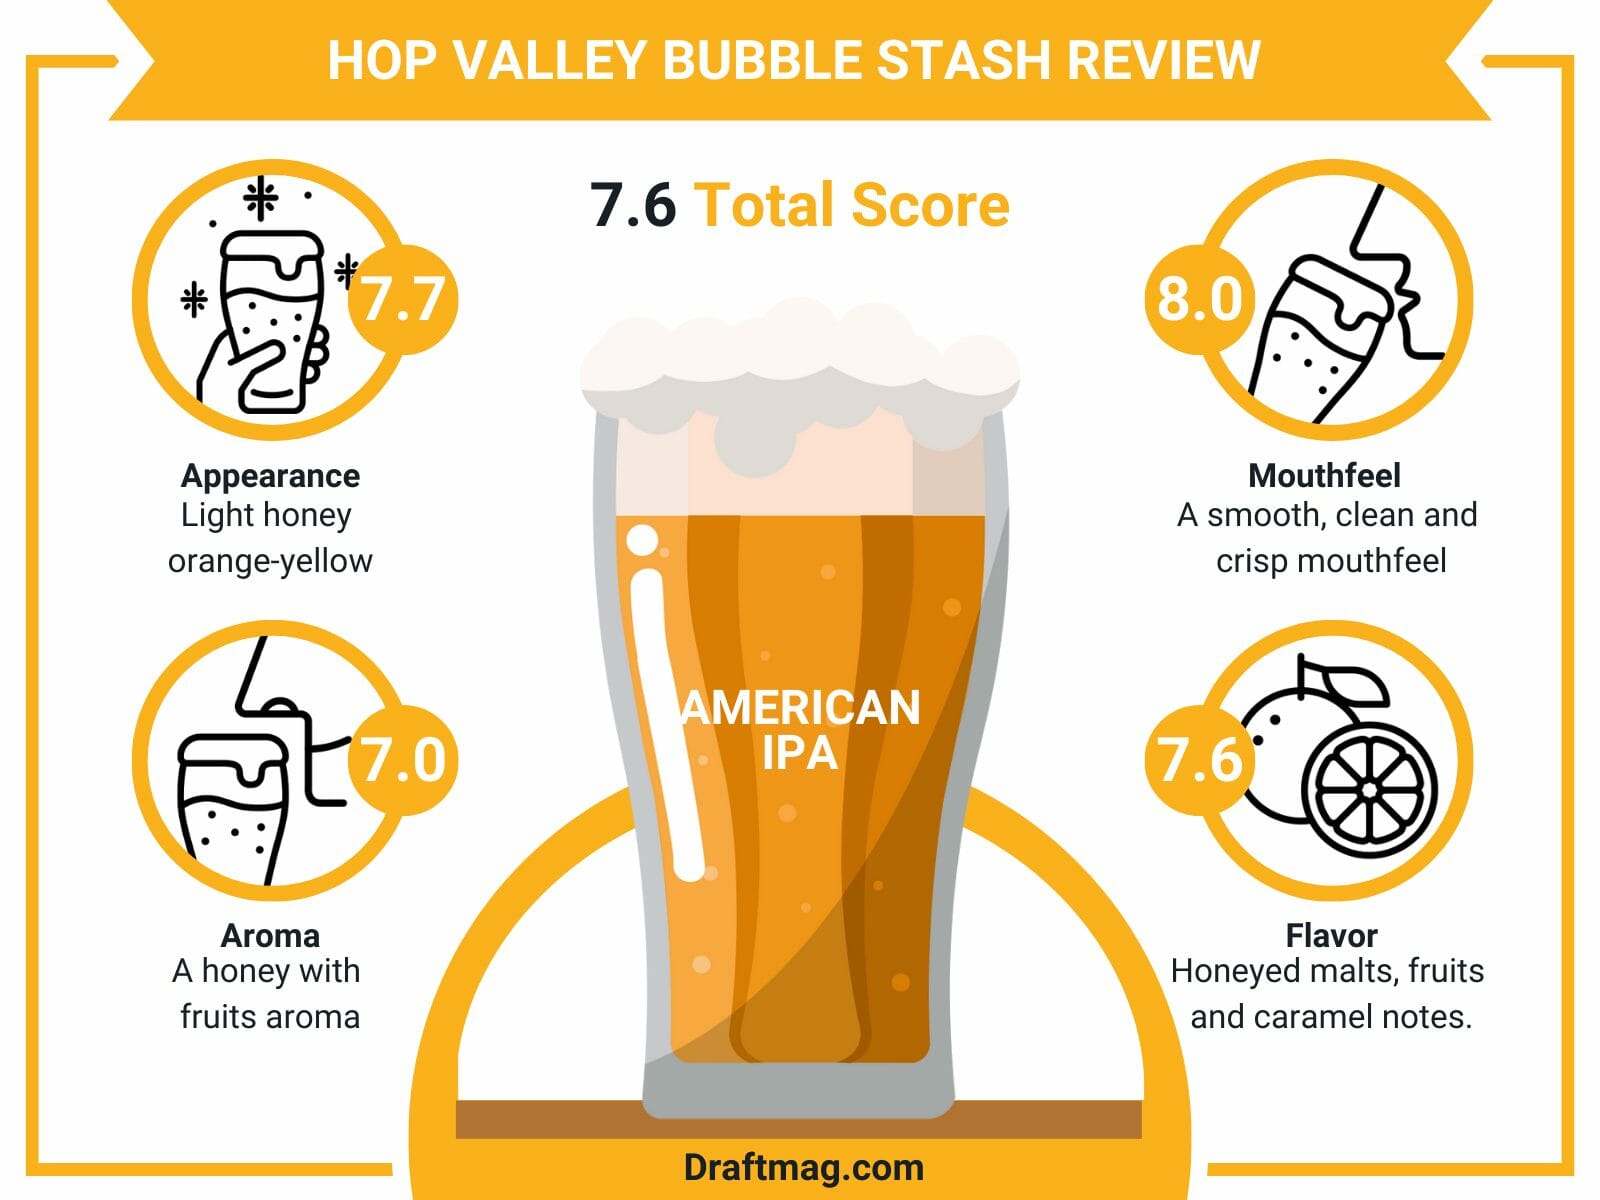 Hop valley bubble stash review infographic